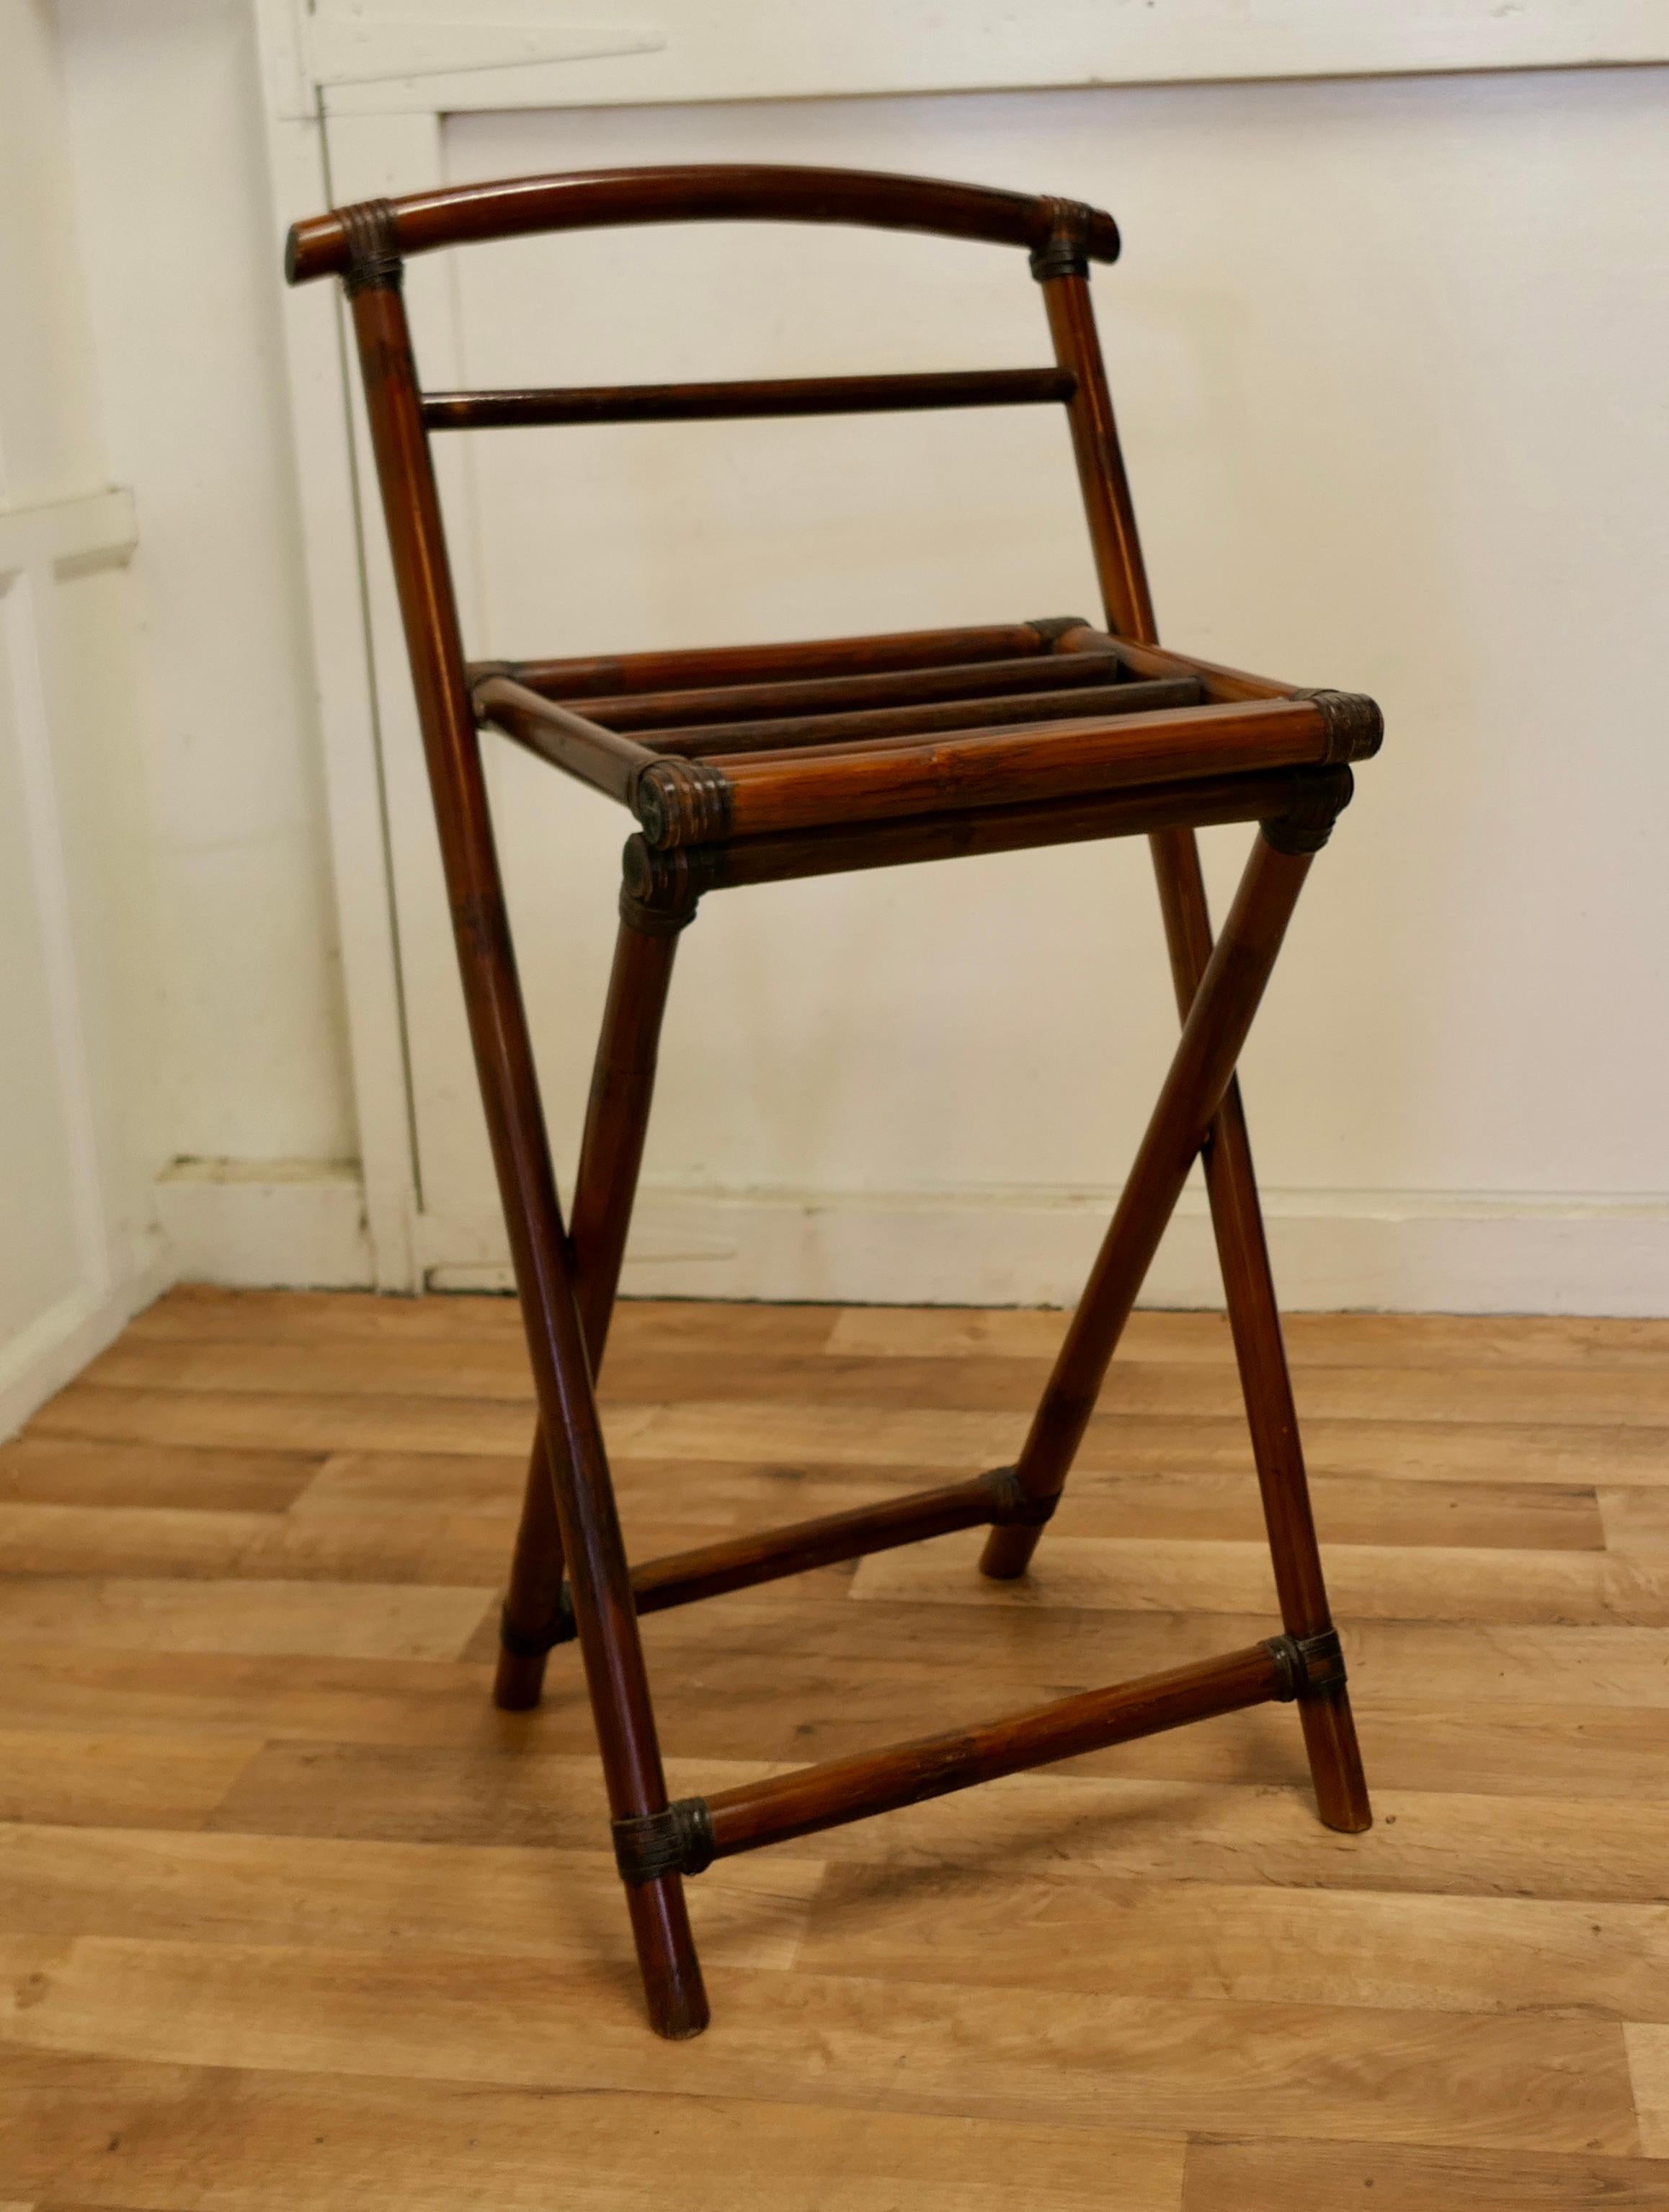  A Folding Bamboo Luggage Rack

This is a good sturdy piece, it is made in chunky bamboo, the stand is very robust and it has the added advantage that it folds flat for storage when not in use

The stand is 21” long, 16” wide and it is 43” high
THM35